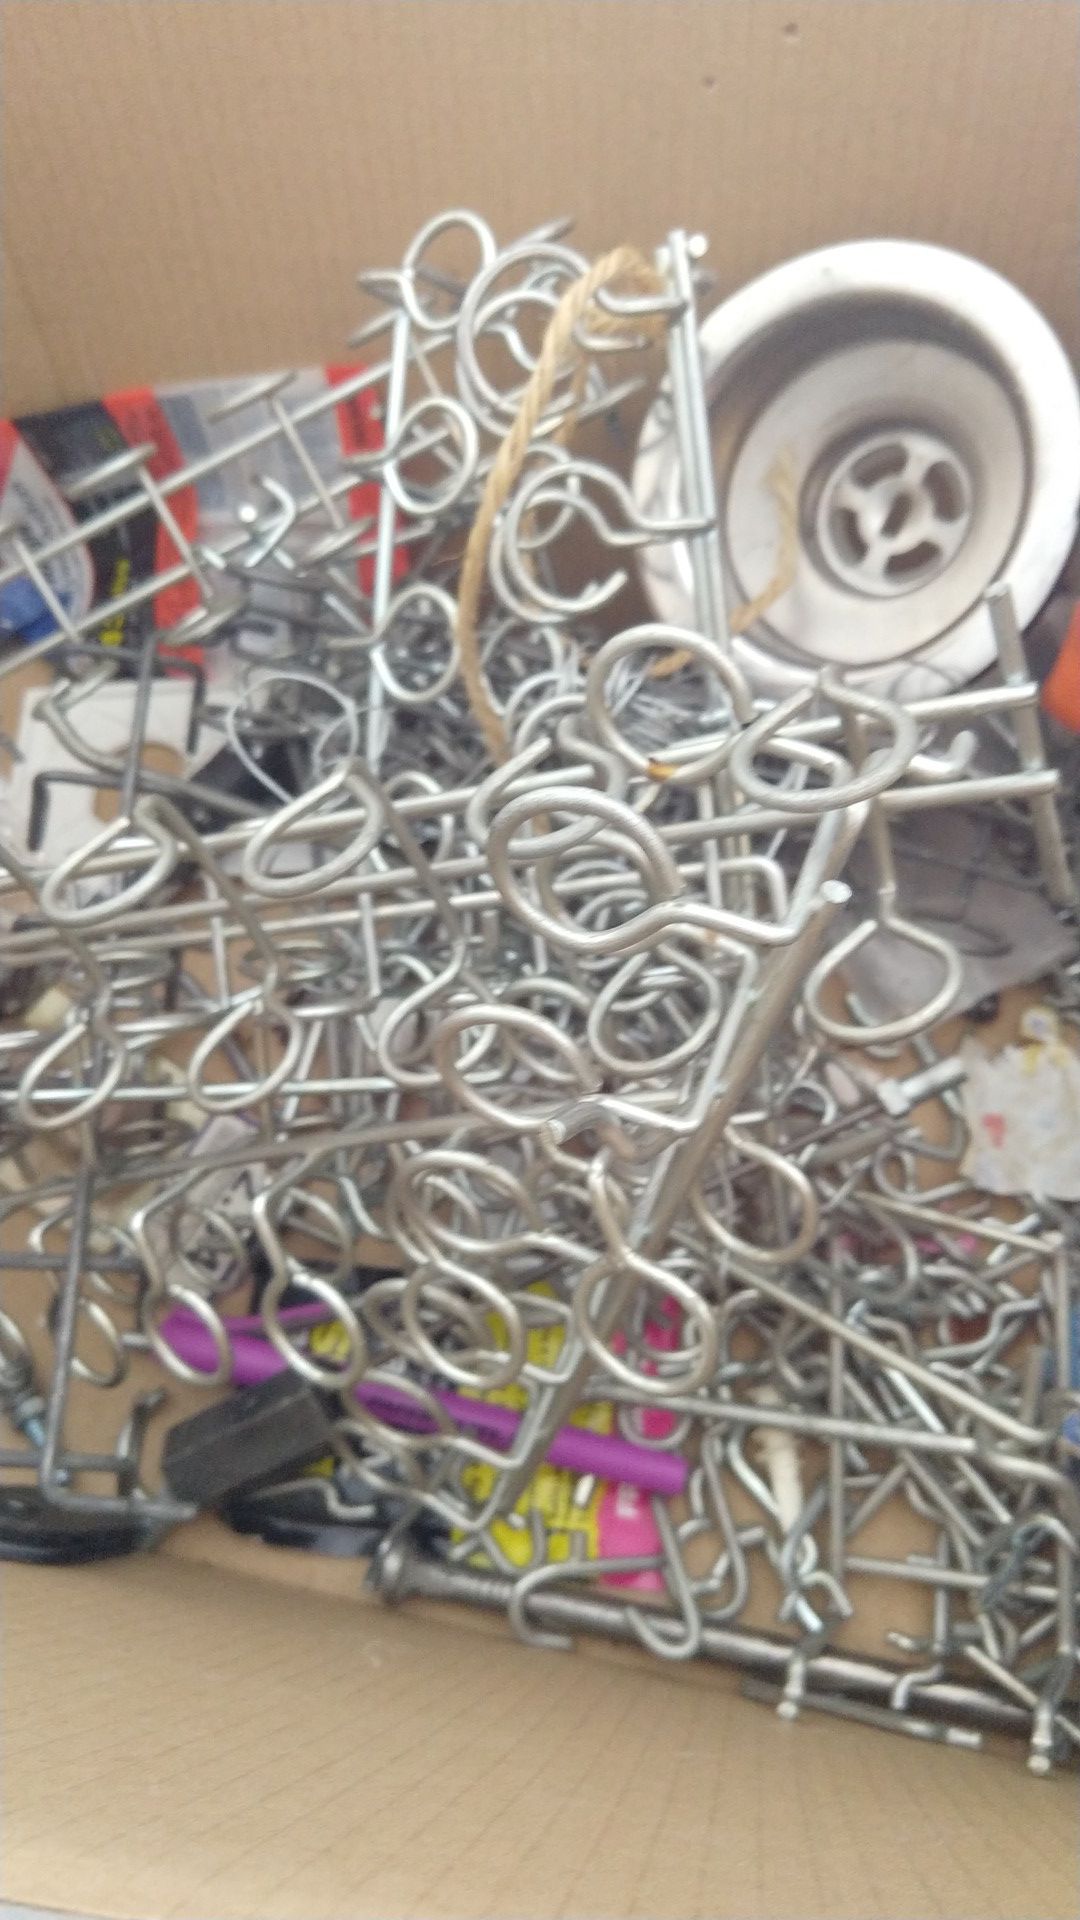 Tons of pegboard hanging clips and tool holders